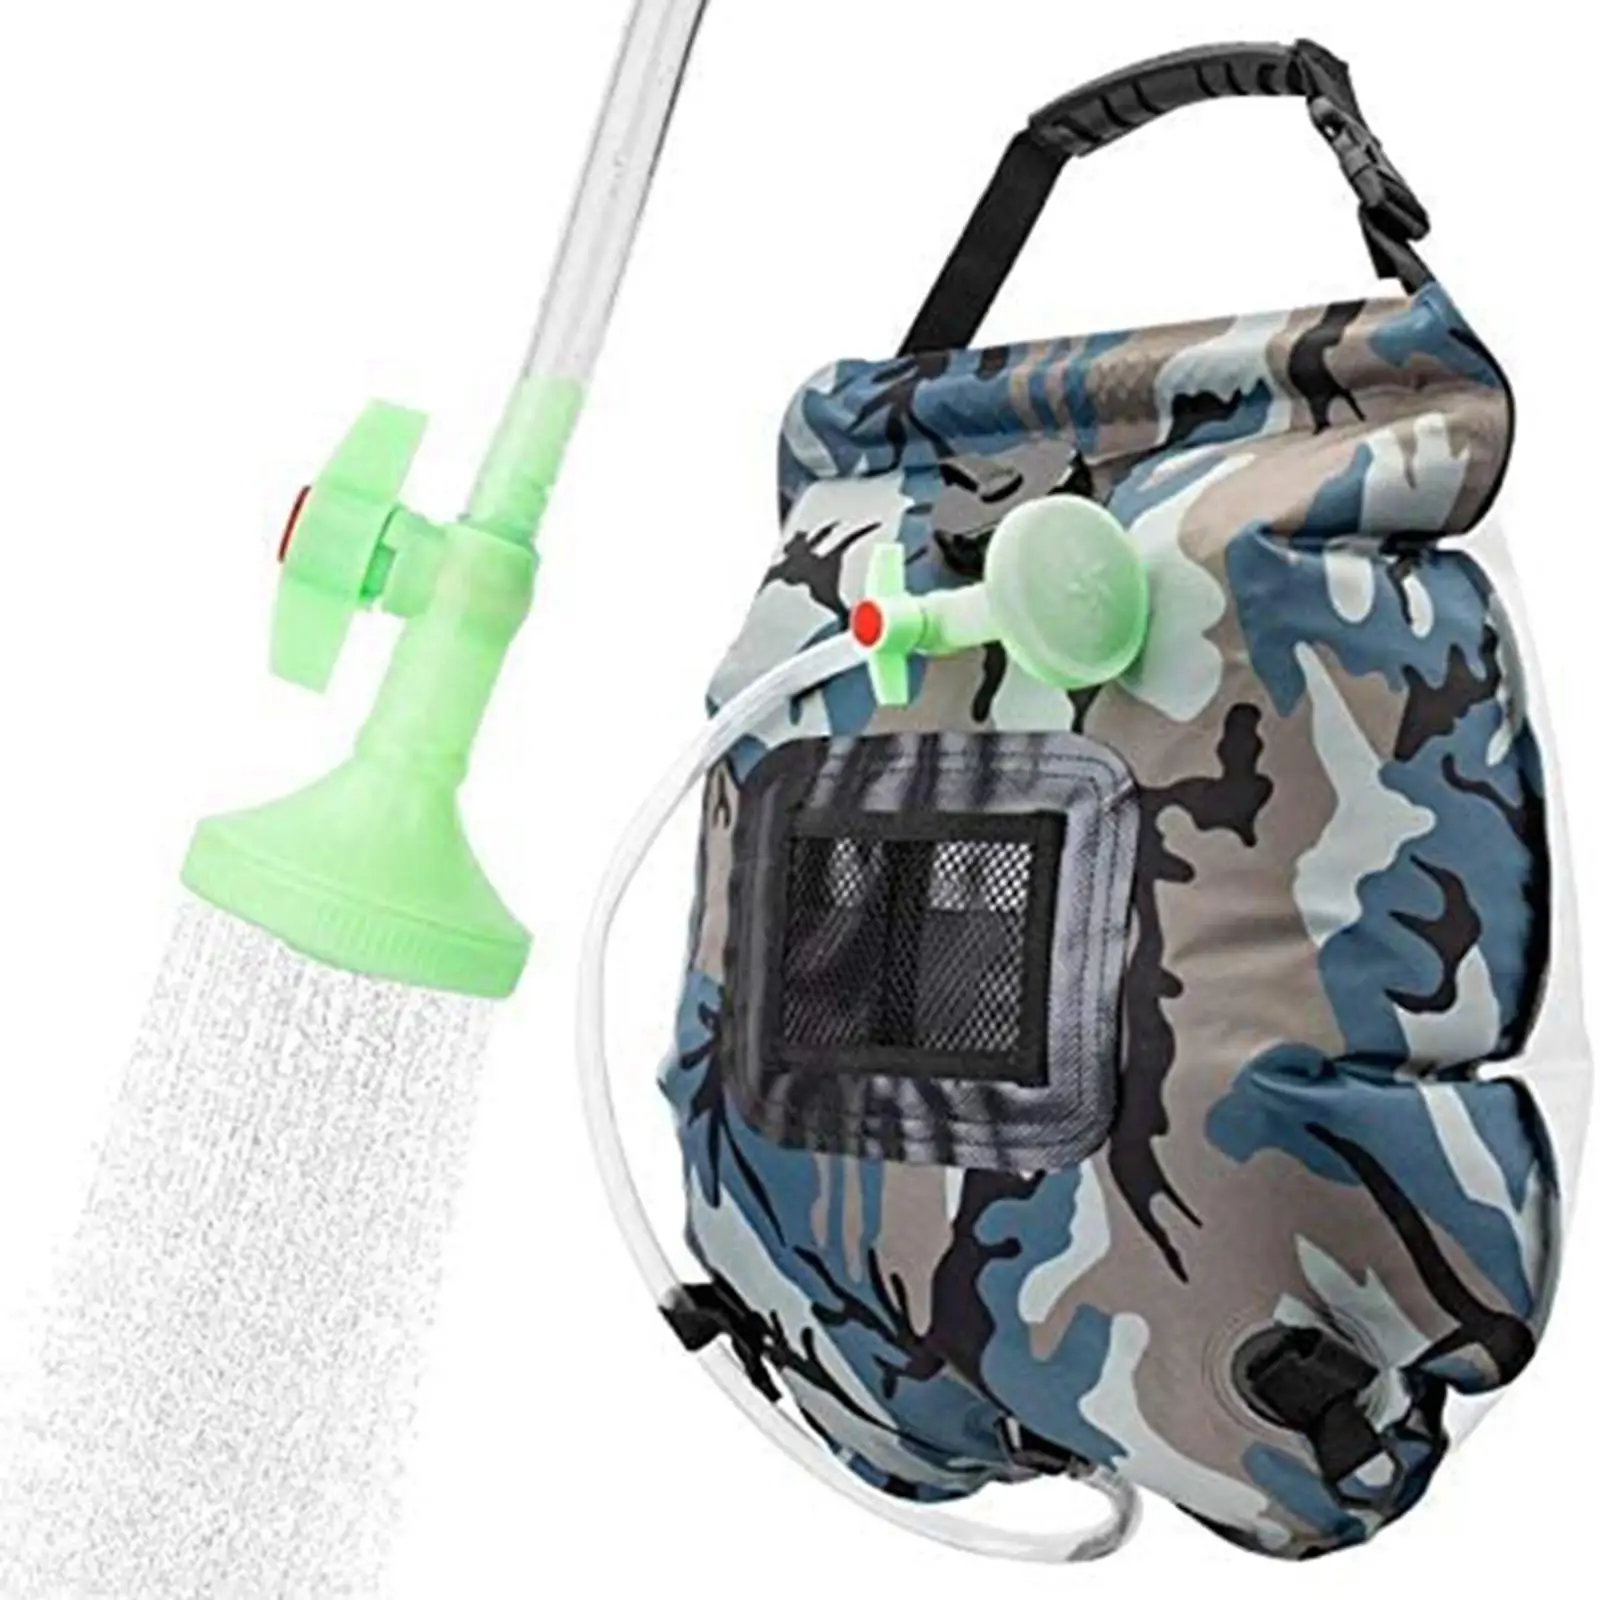 Portable Camping Shower Bag Water Storage Heated 5gallons/20L for Traveling Fishing Beach